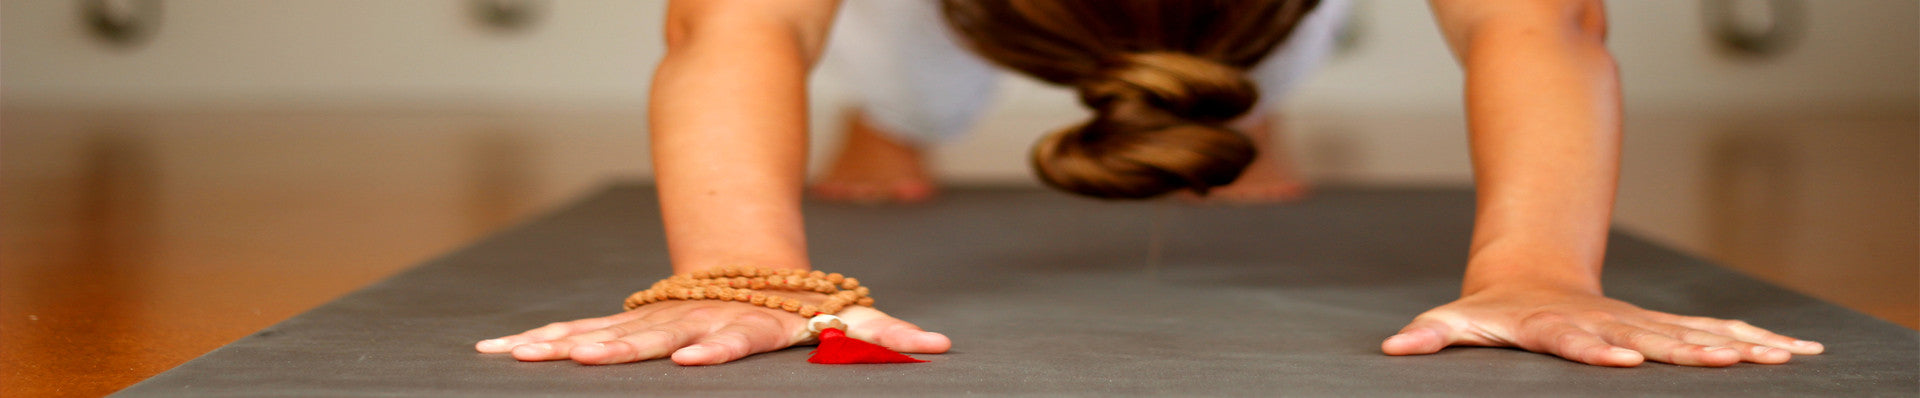 How to Clean Your Yoga Mat